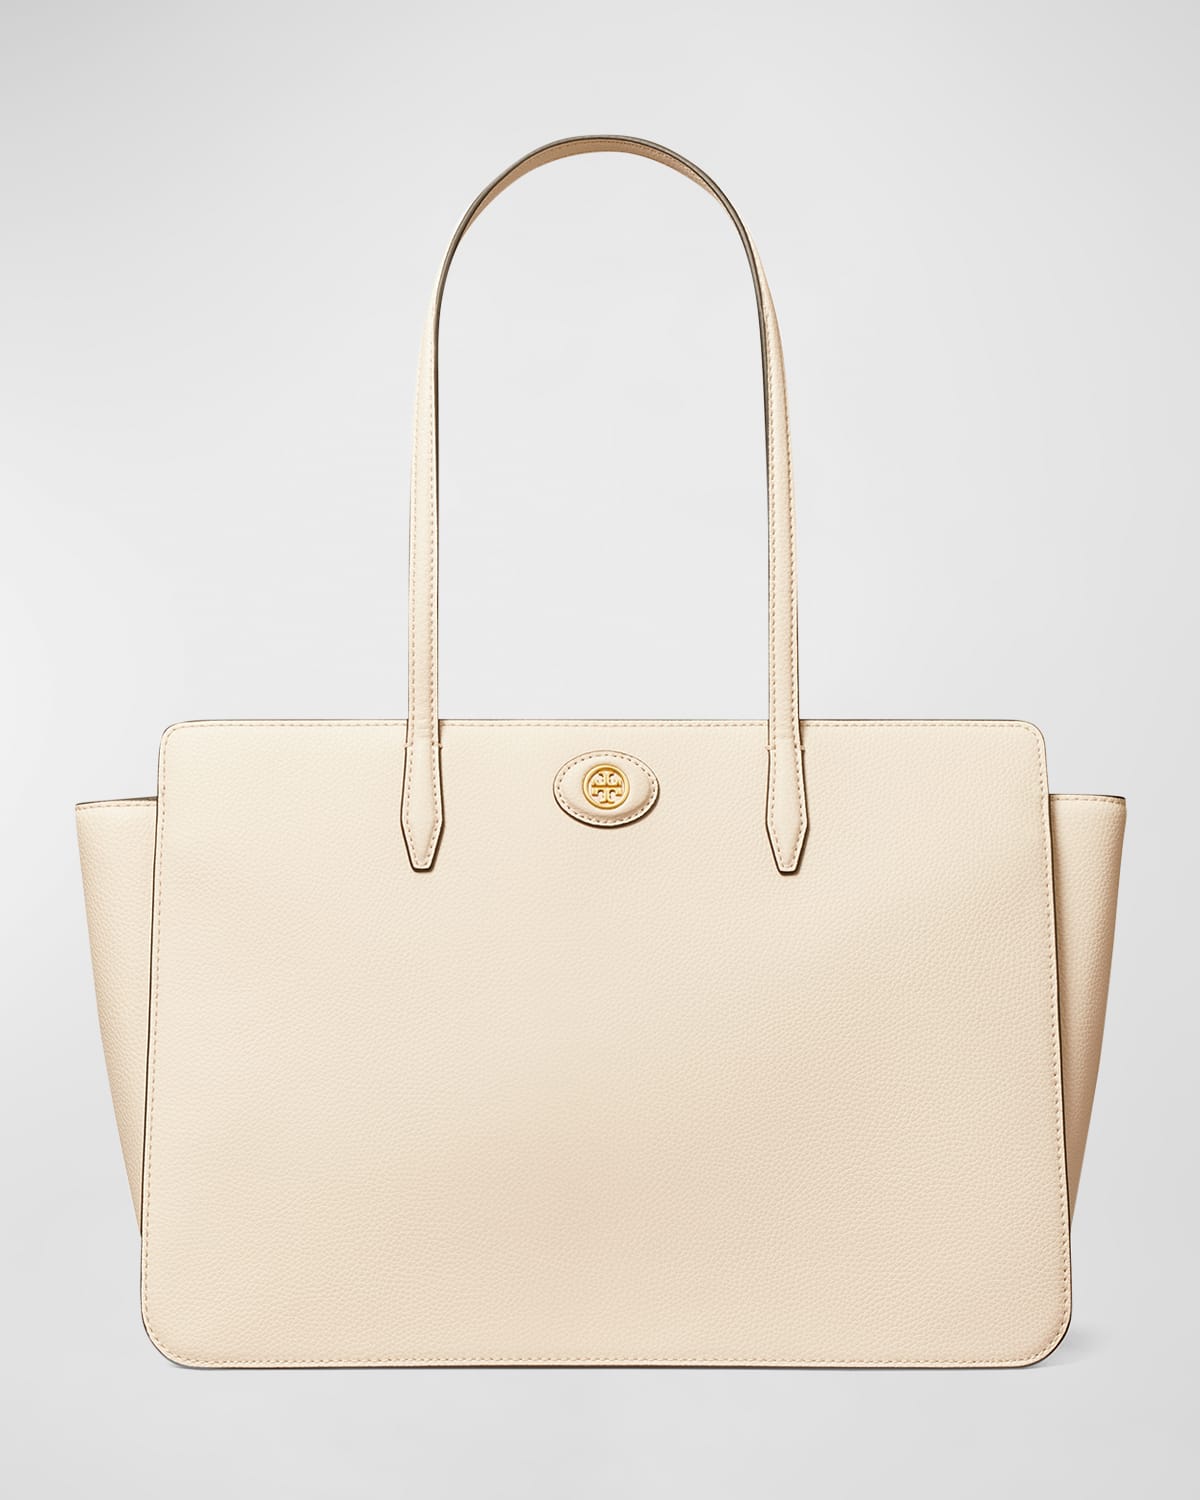 TORY BURCH ROBINSON PEBBLED LEATHER TOTE BAG